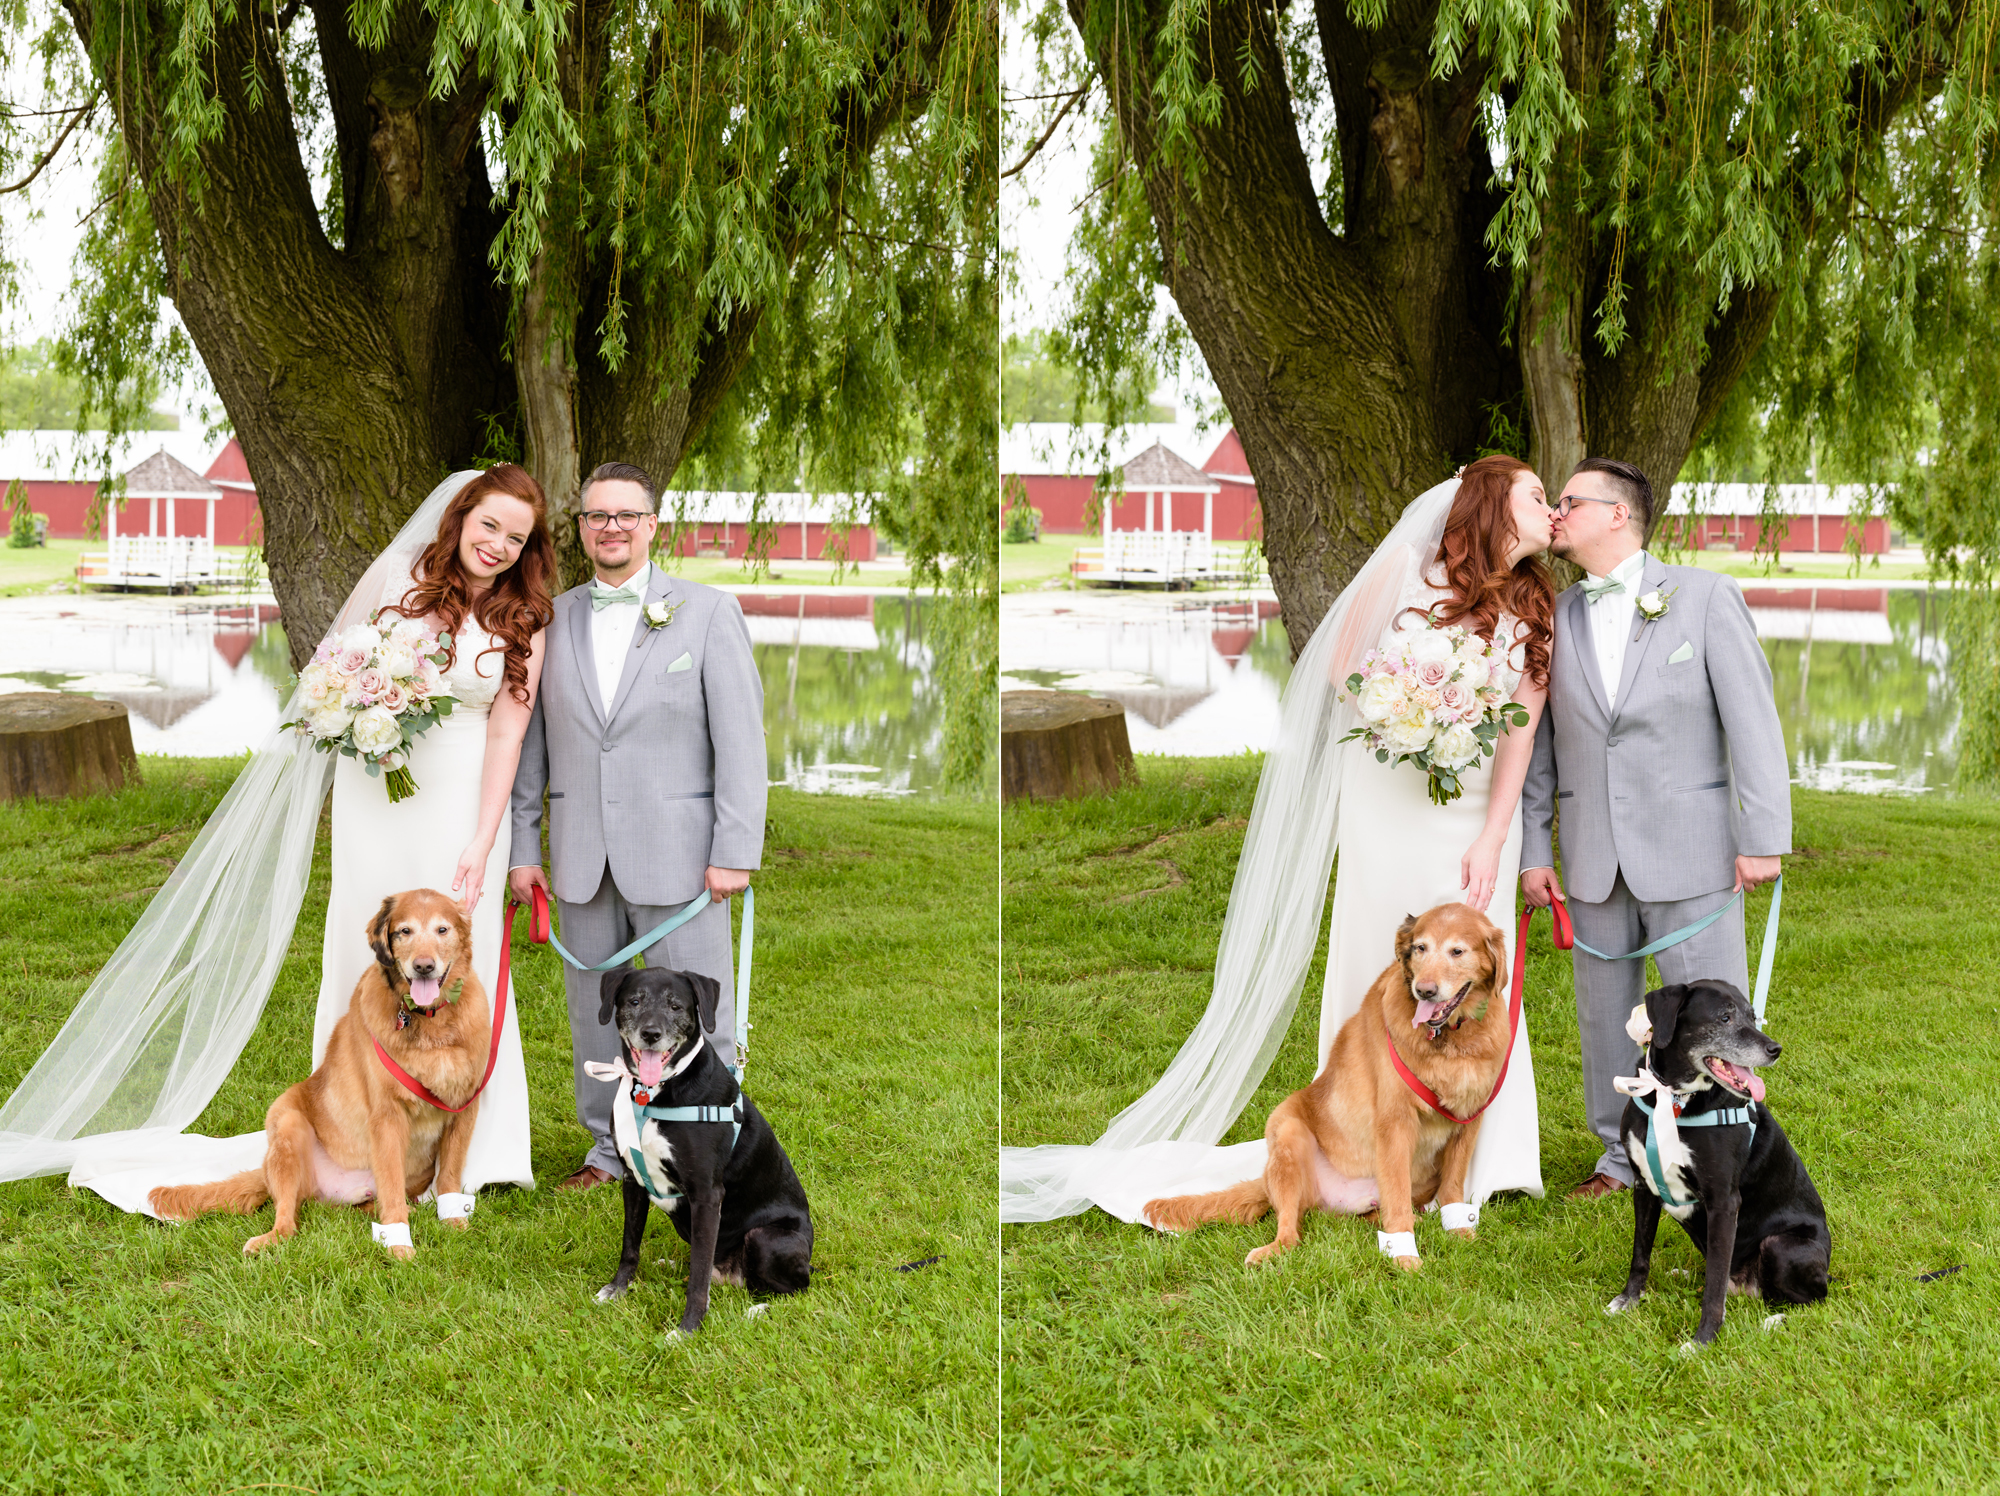 Bride & Groom do a first look with their dogs before their wedding at Amish Acres